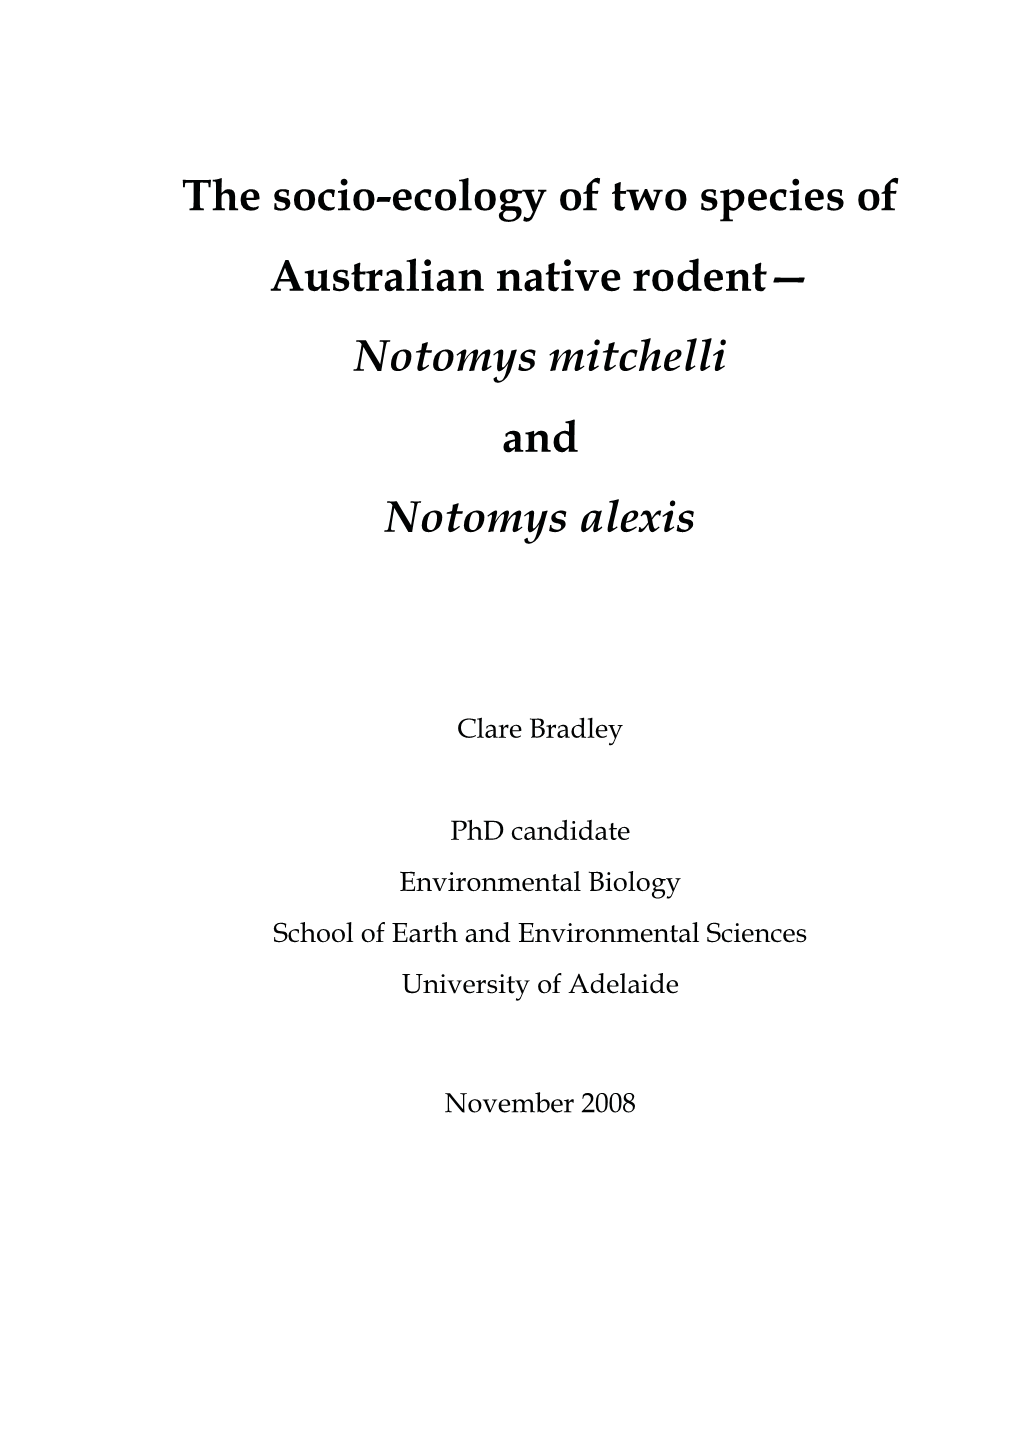 The Socio-Ecology of Two Species of Australian Native Rodent—Notomys